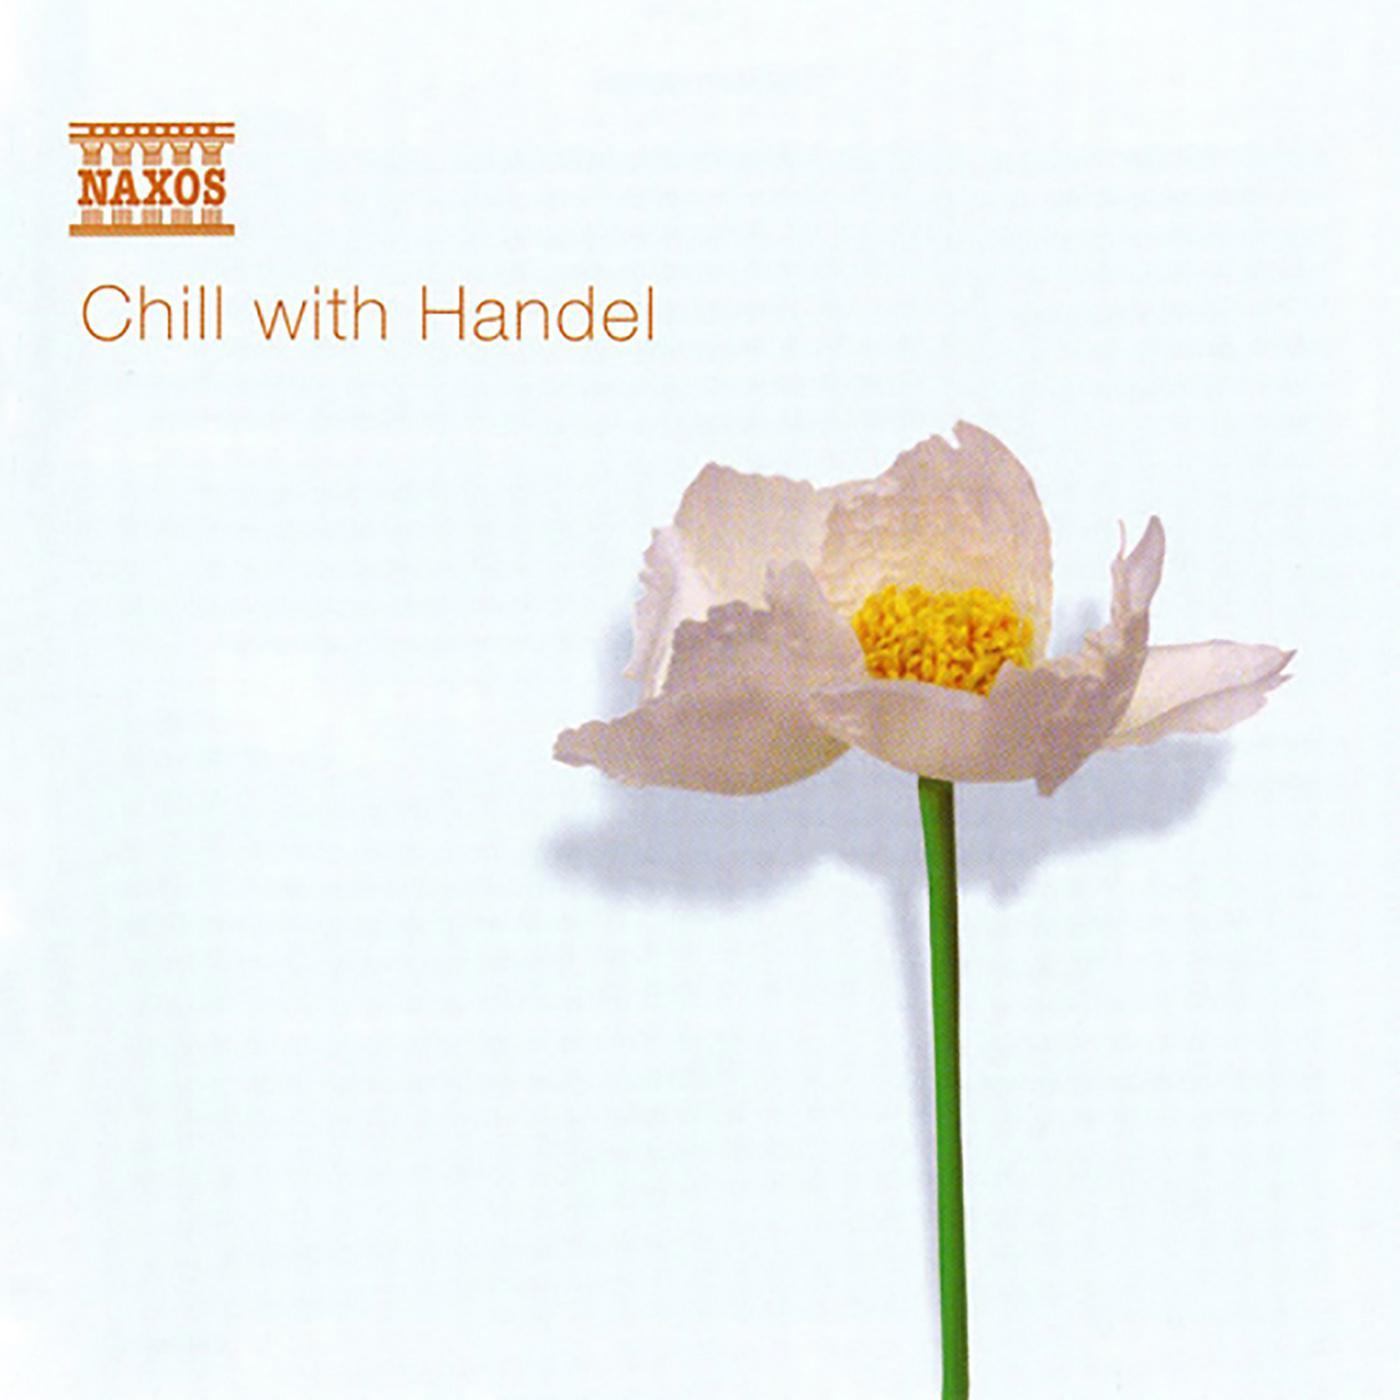 CHILL WITH HANDEL